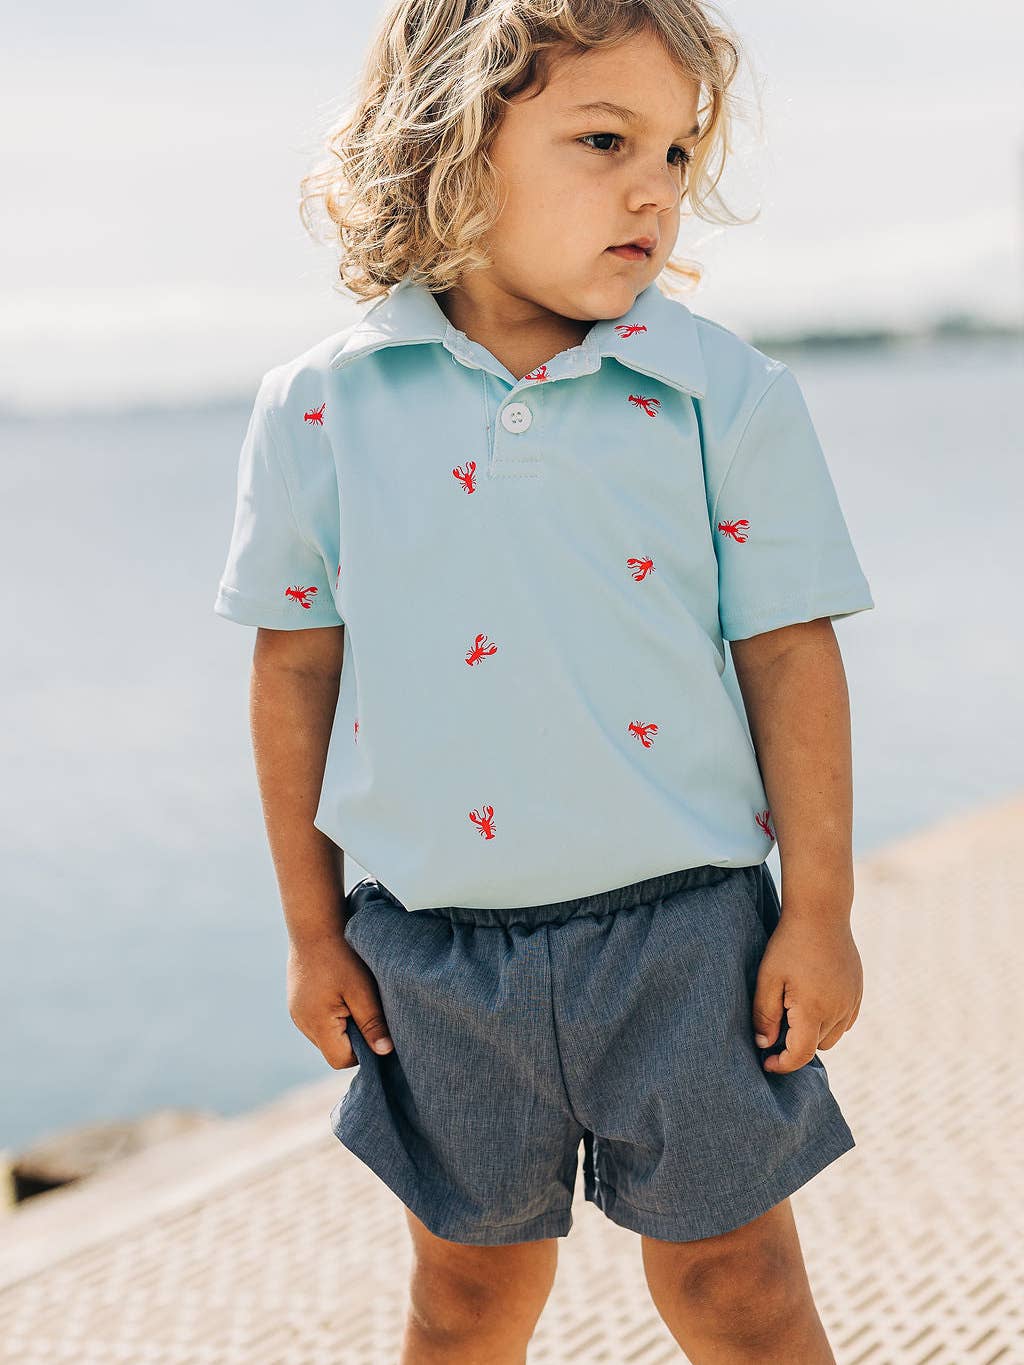 a little boy wearing a Sugar Bee Clothing Crawfish Polo Shirt and standing on a sidewalk.